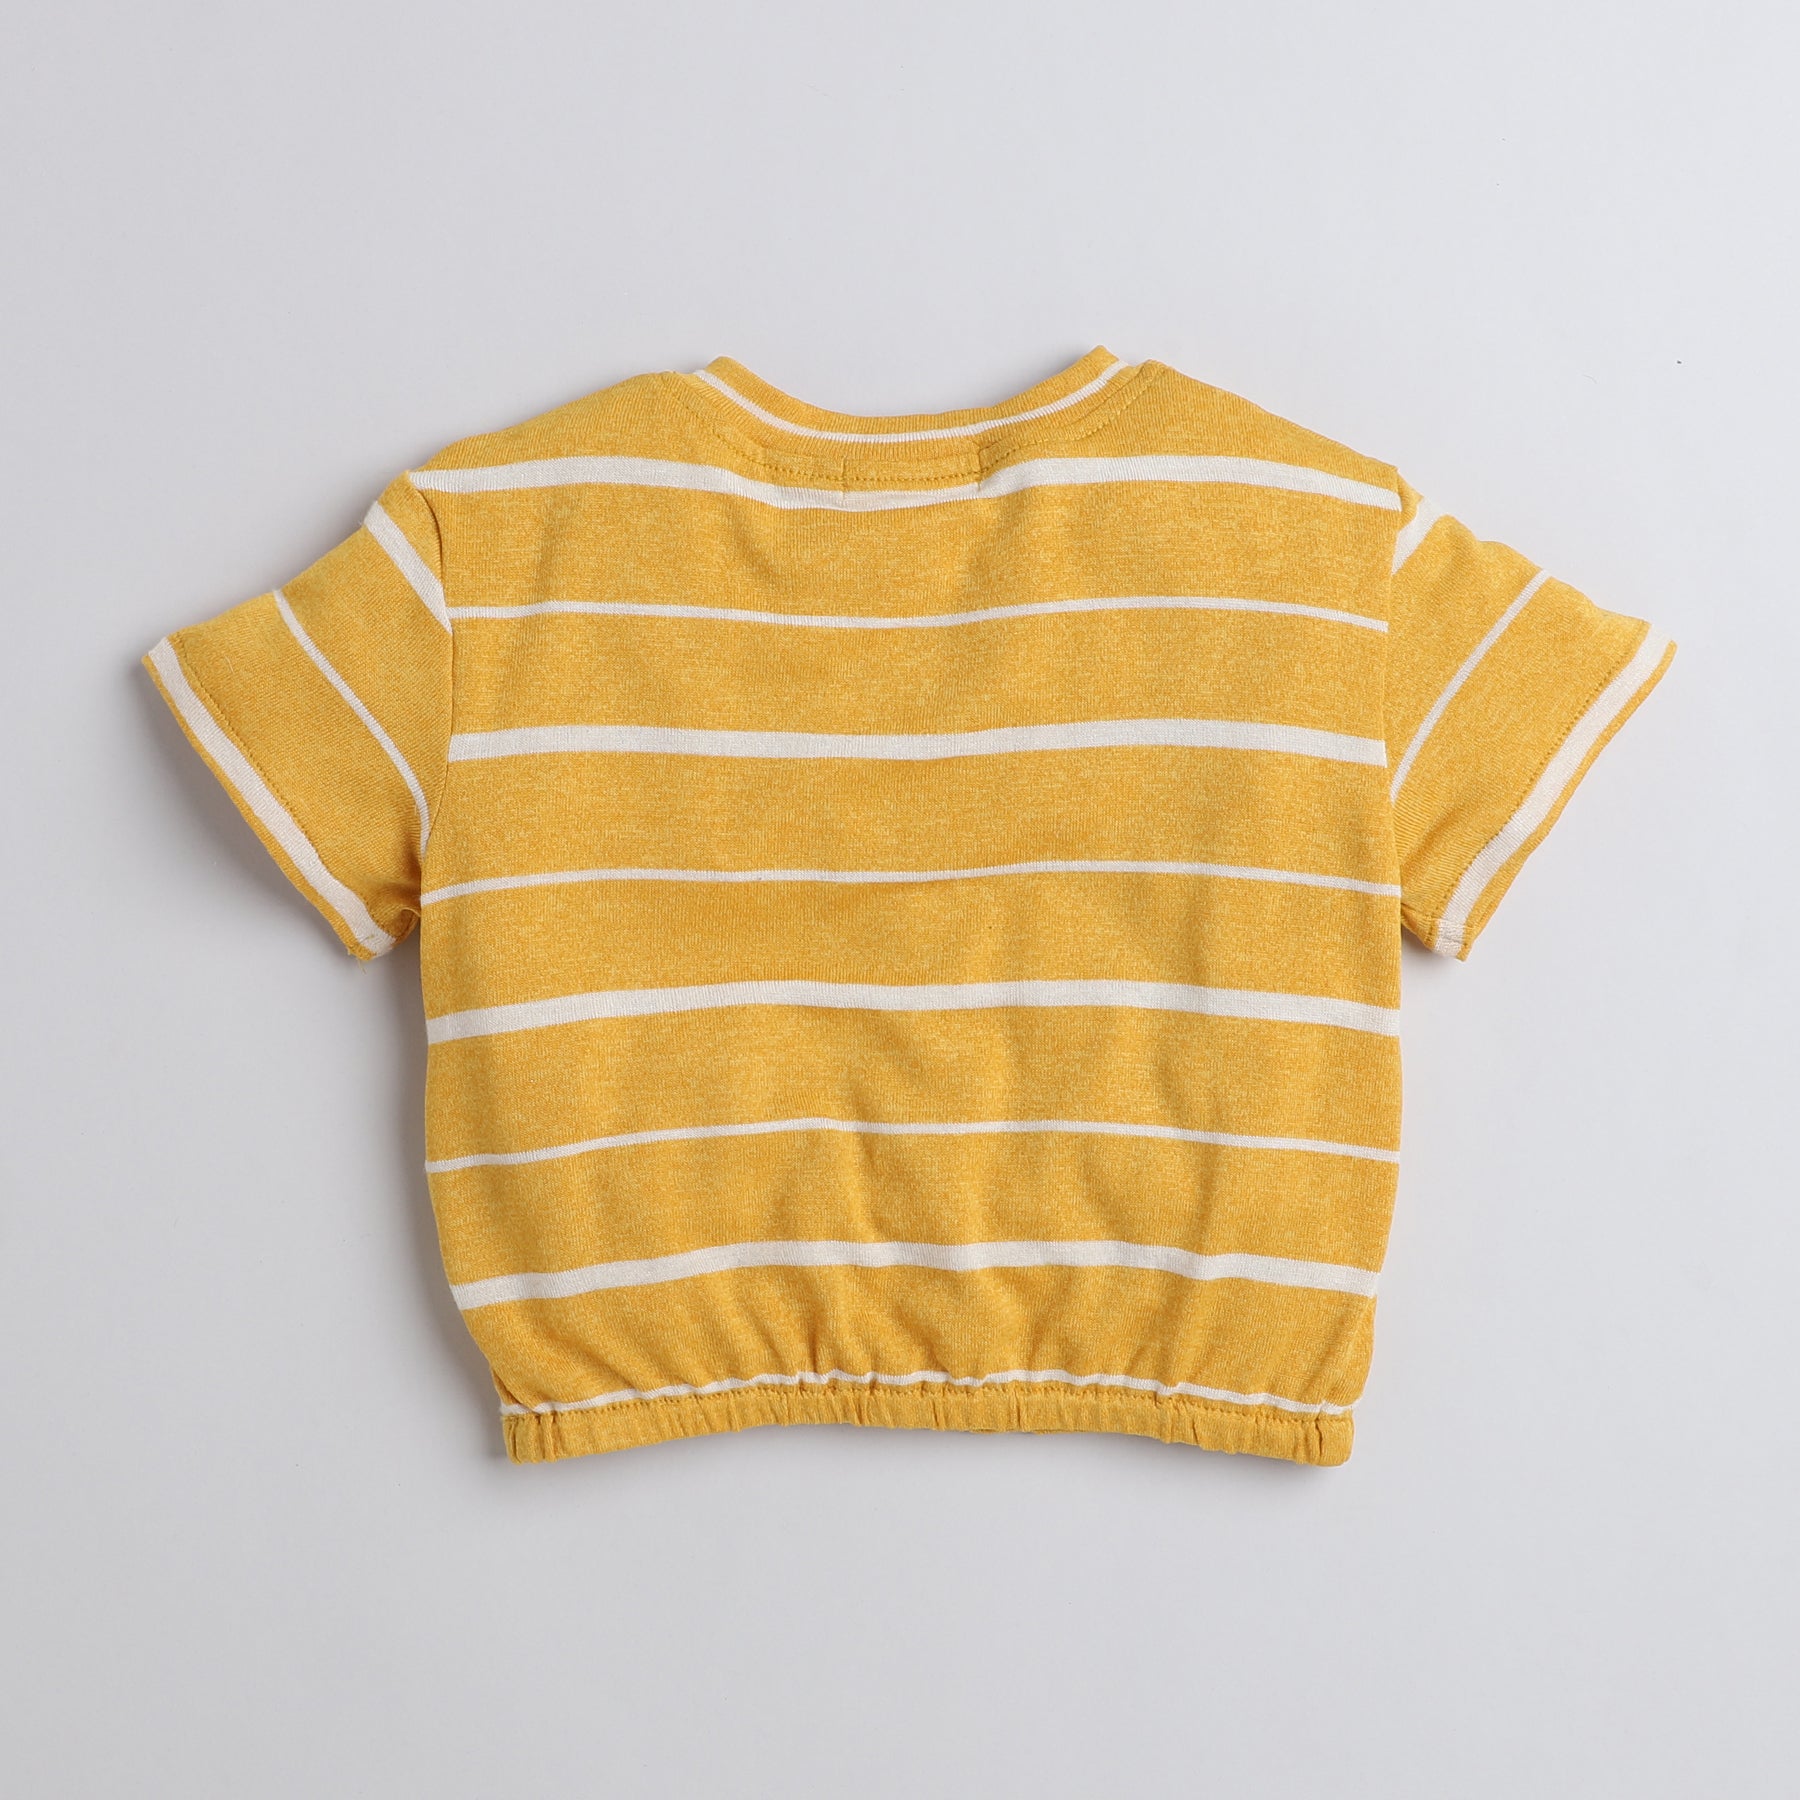 Shop Striped Yarn Dyed Half Sleeves Crop Top And Sleeveless Crop Top Pack Of Two-Yellow/Maroon Online